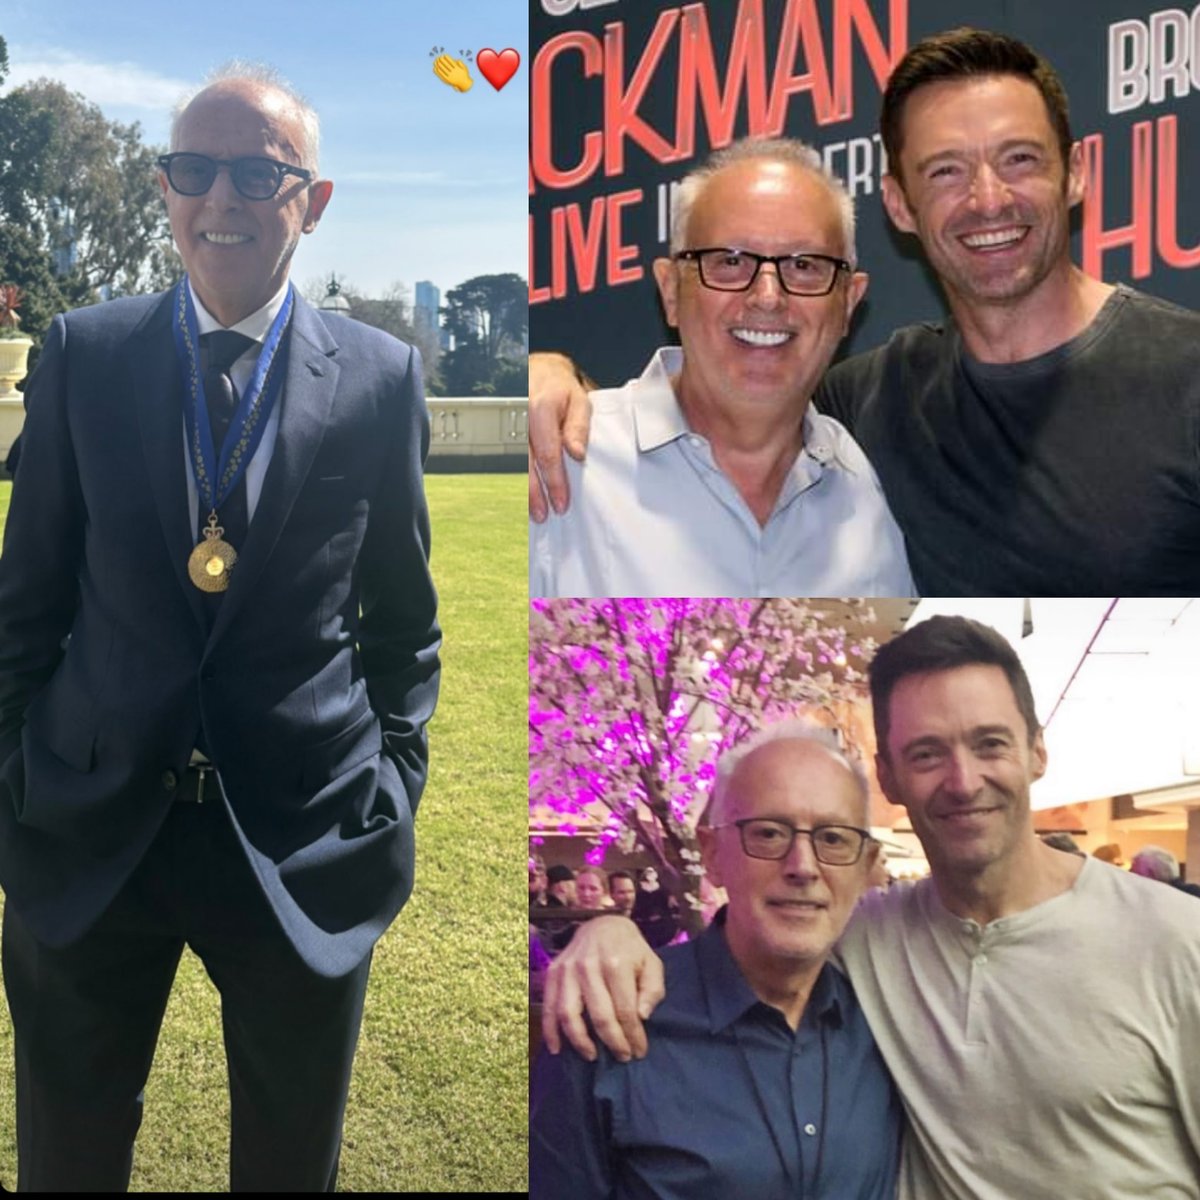 We'd like to congratulate concert promoter Paul Dainty who received his medal as Officer of the Order of Australia this past Wednesday. Paul was one of the first in the business to recognize Hugh's potential when Hugh was at WAAPA. #hughjackman 📷 Holly Dainty,TEG DAINTY